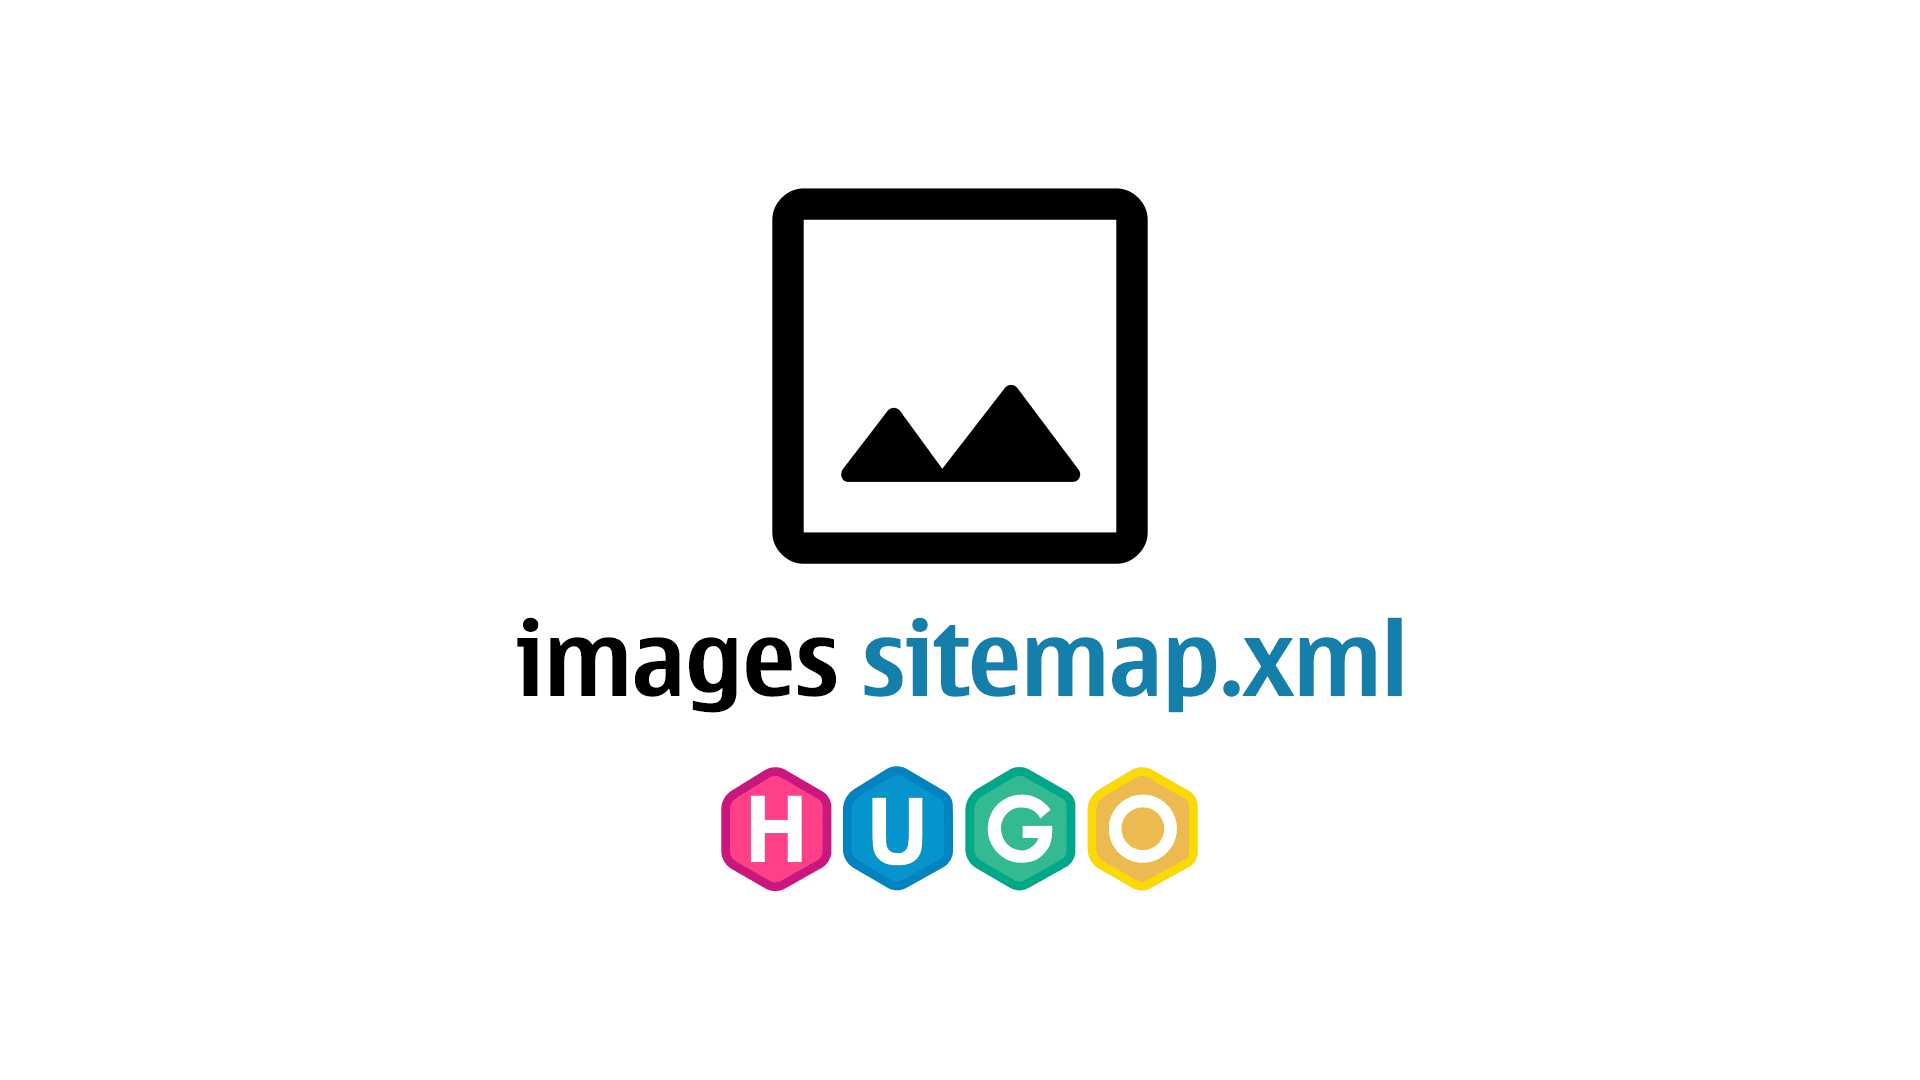 Add and use an image sitemap with Hugo